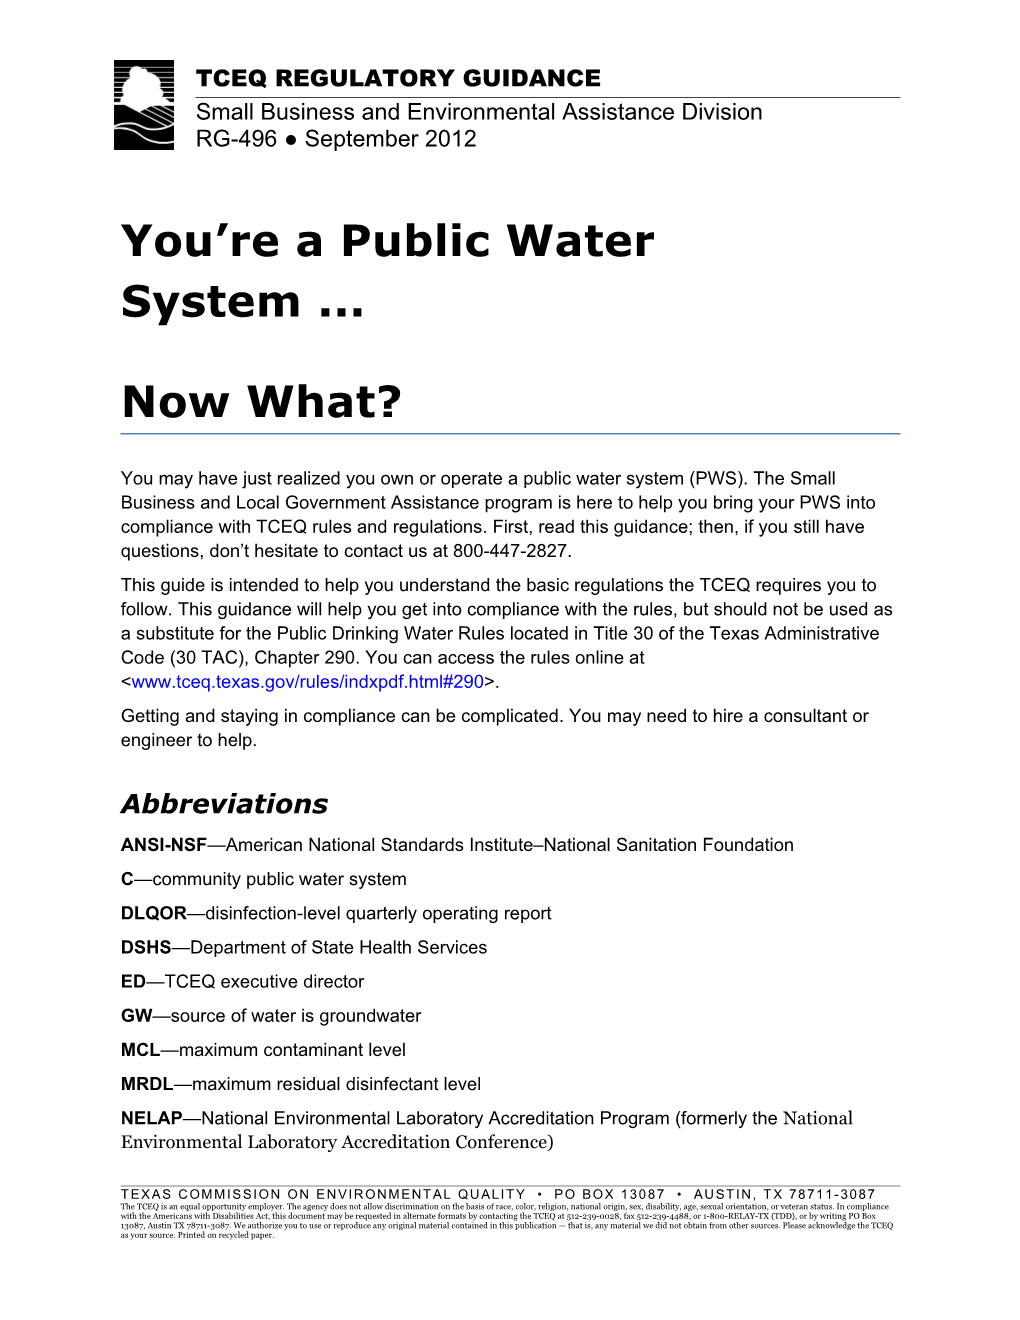 You're a Public Water System Now What?